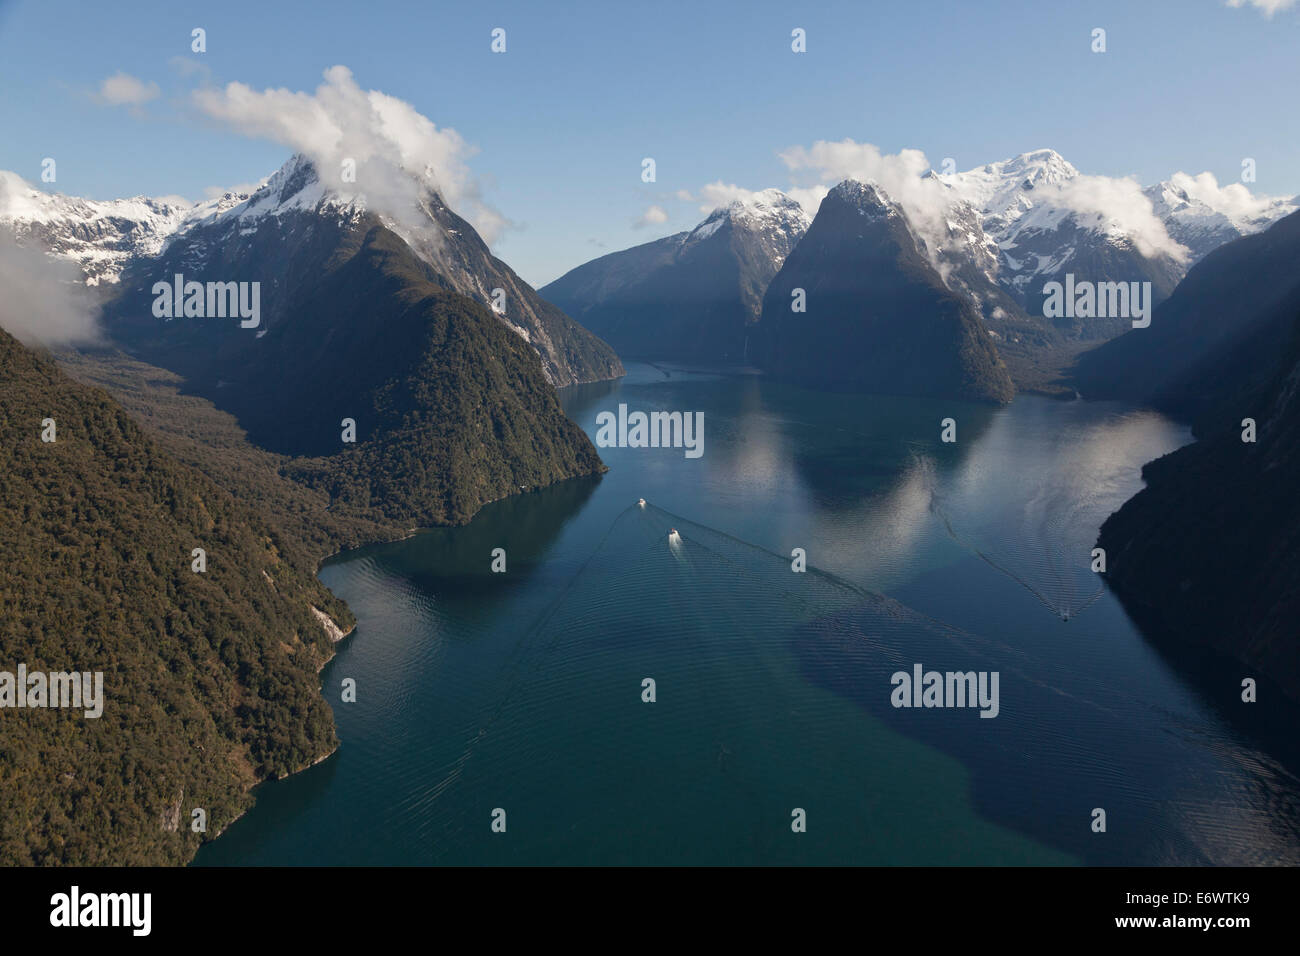 Aerial view of Milford Sound with the snowcapped mountain of Mitre Peak, Milford Sound, Fiordland National Park, South Island, N Stock Photo